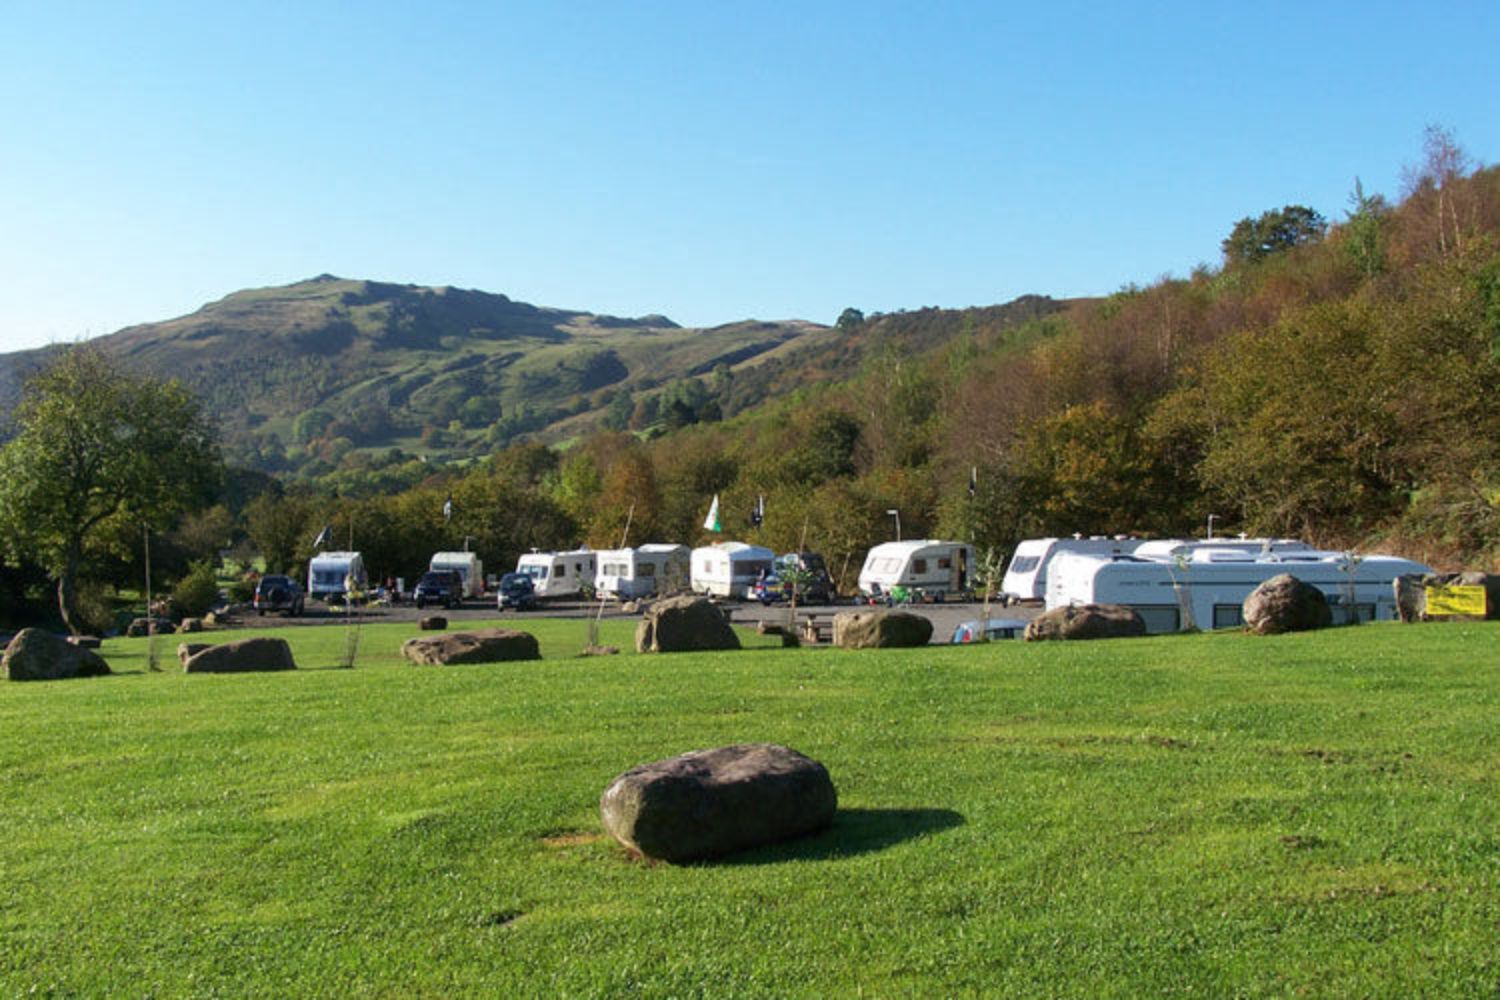 Parked up caravans next to big hill on sunny day, Brecon Beacons